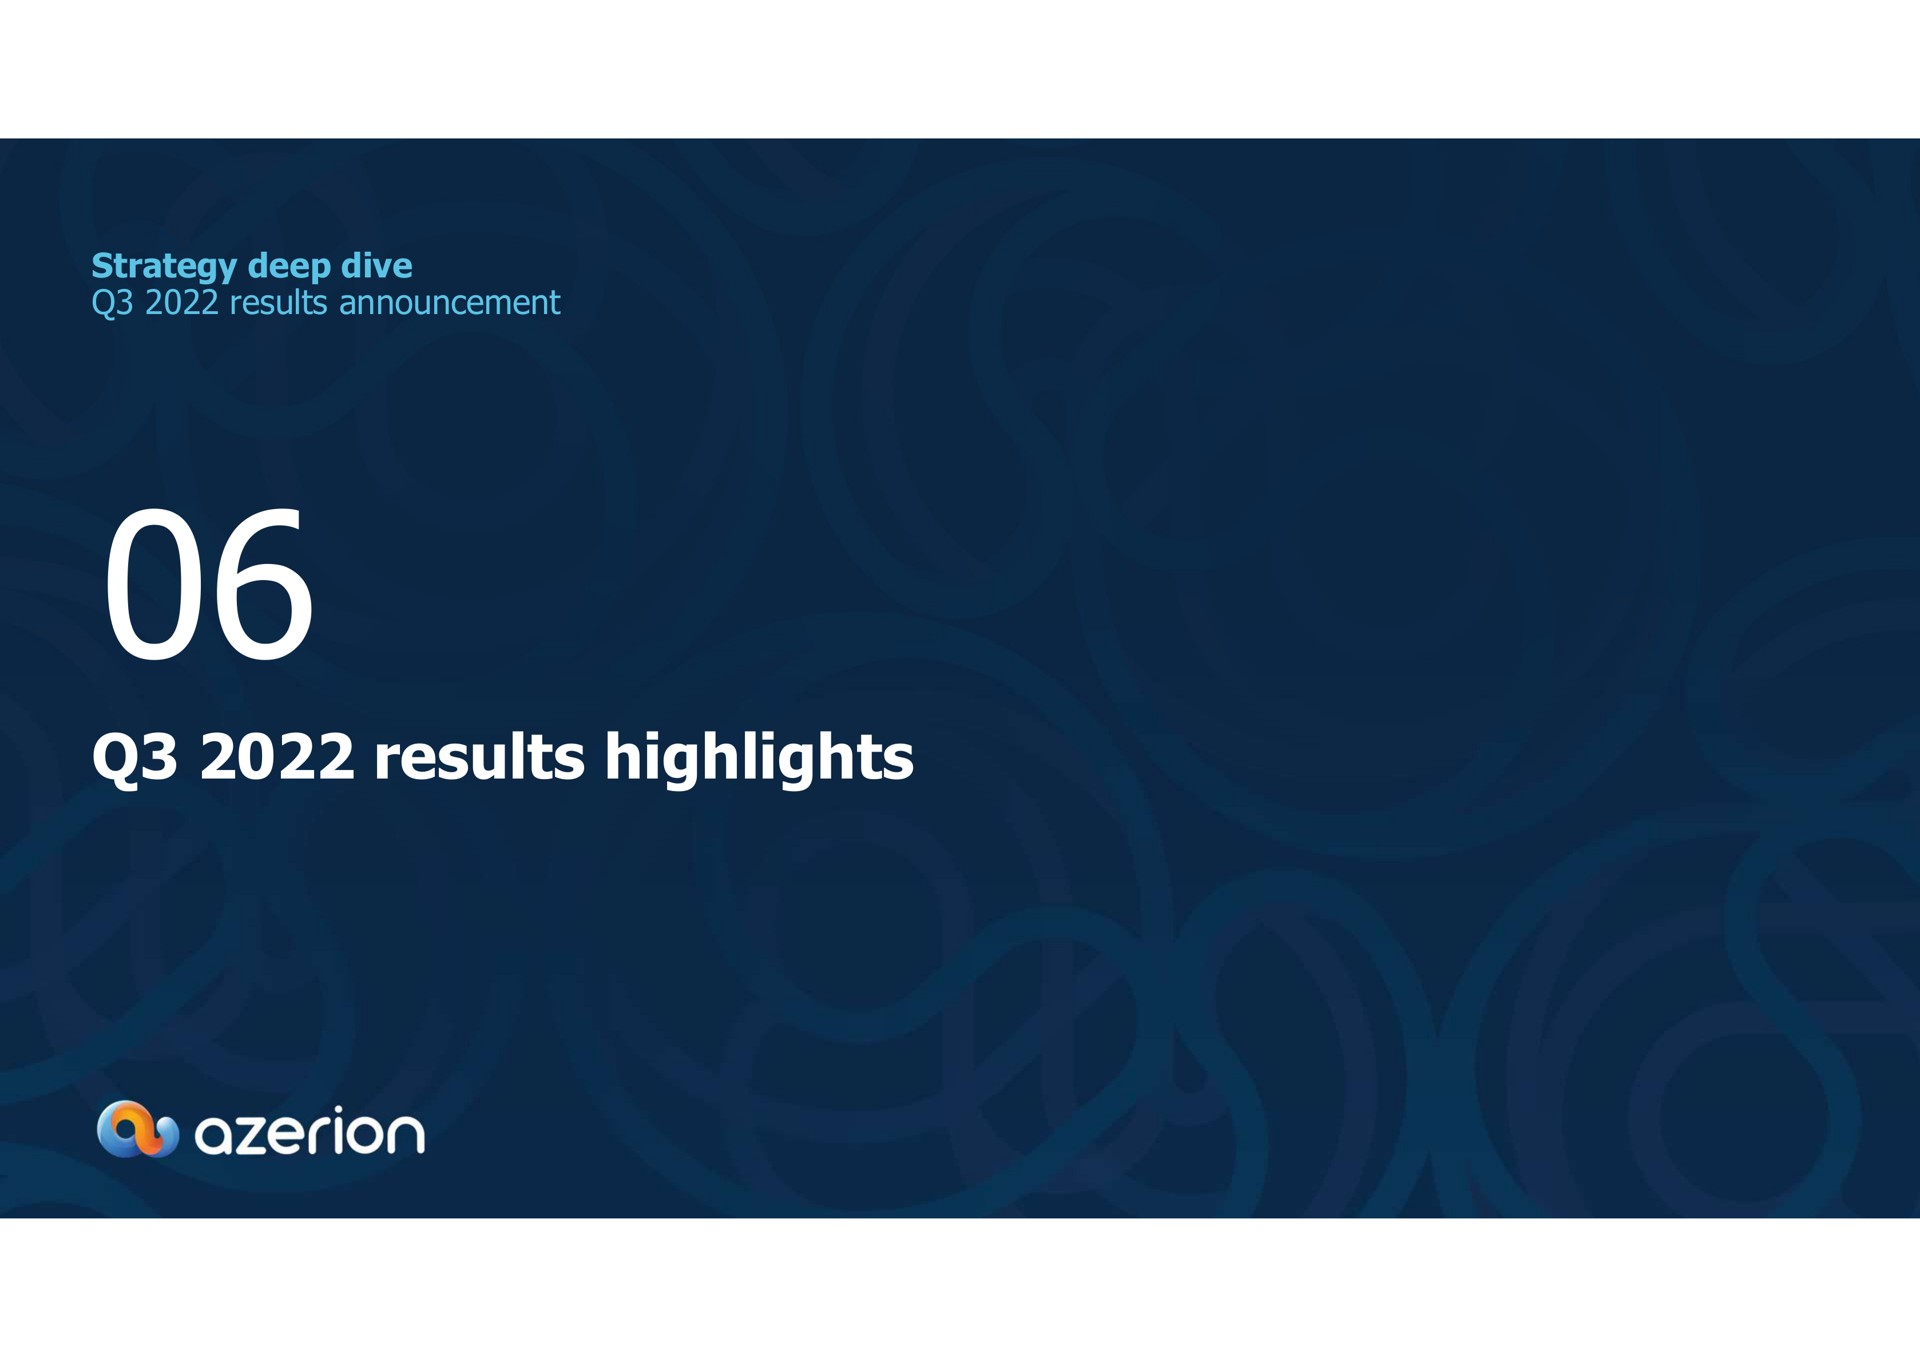 strategy deep dive results announcement results highlights as | Azerion